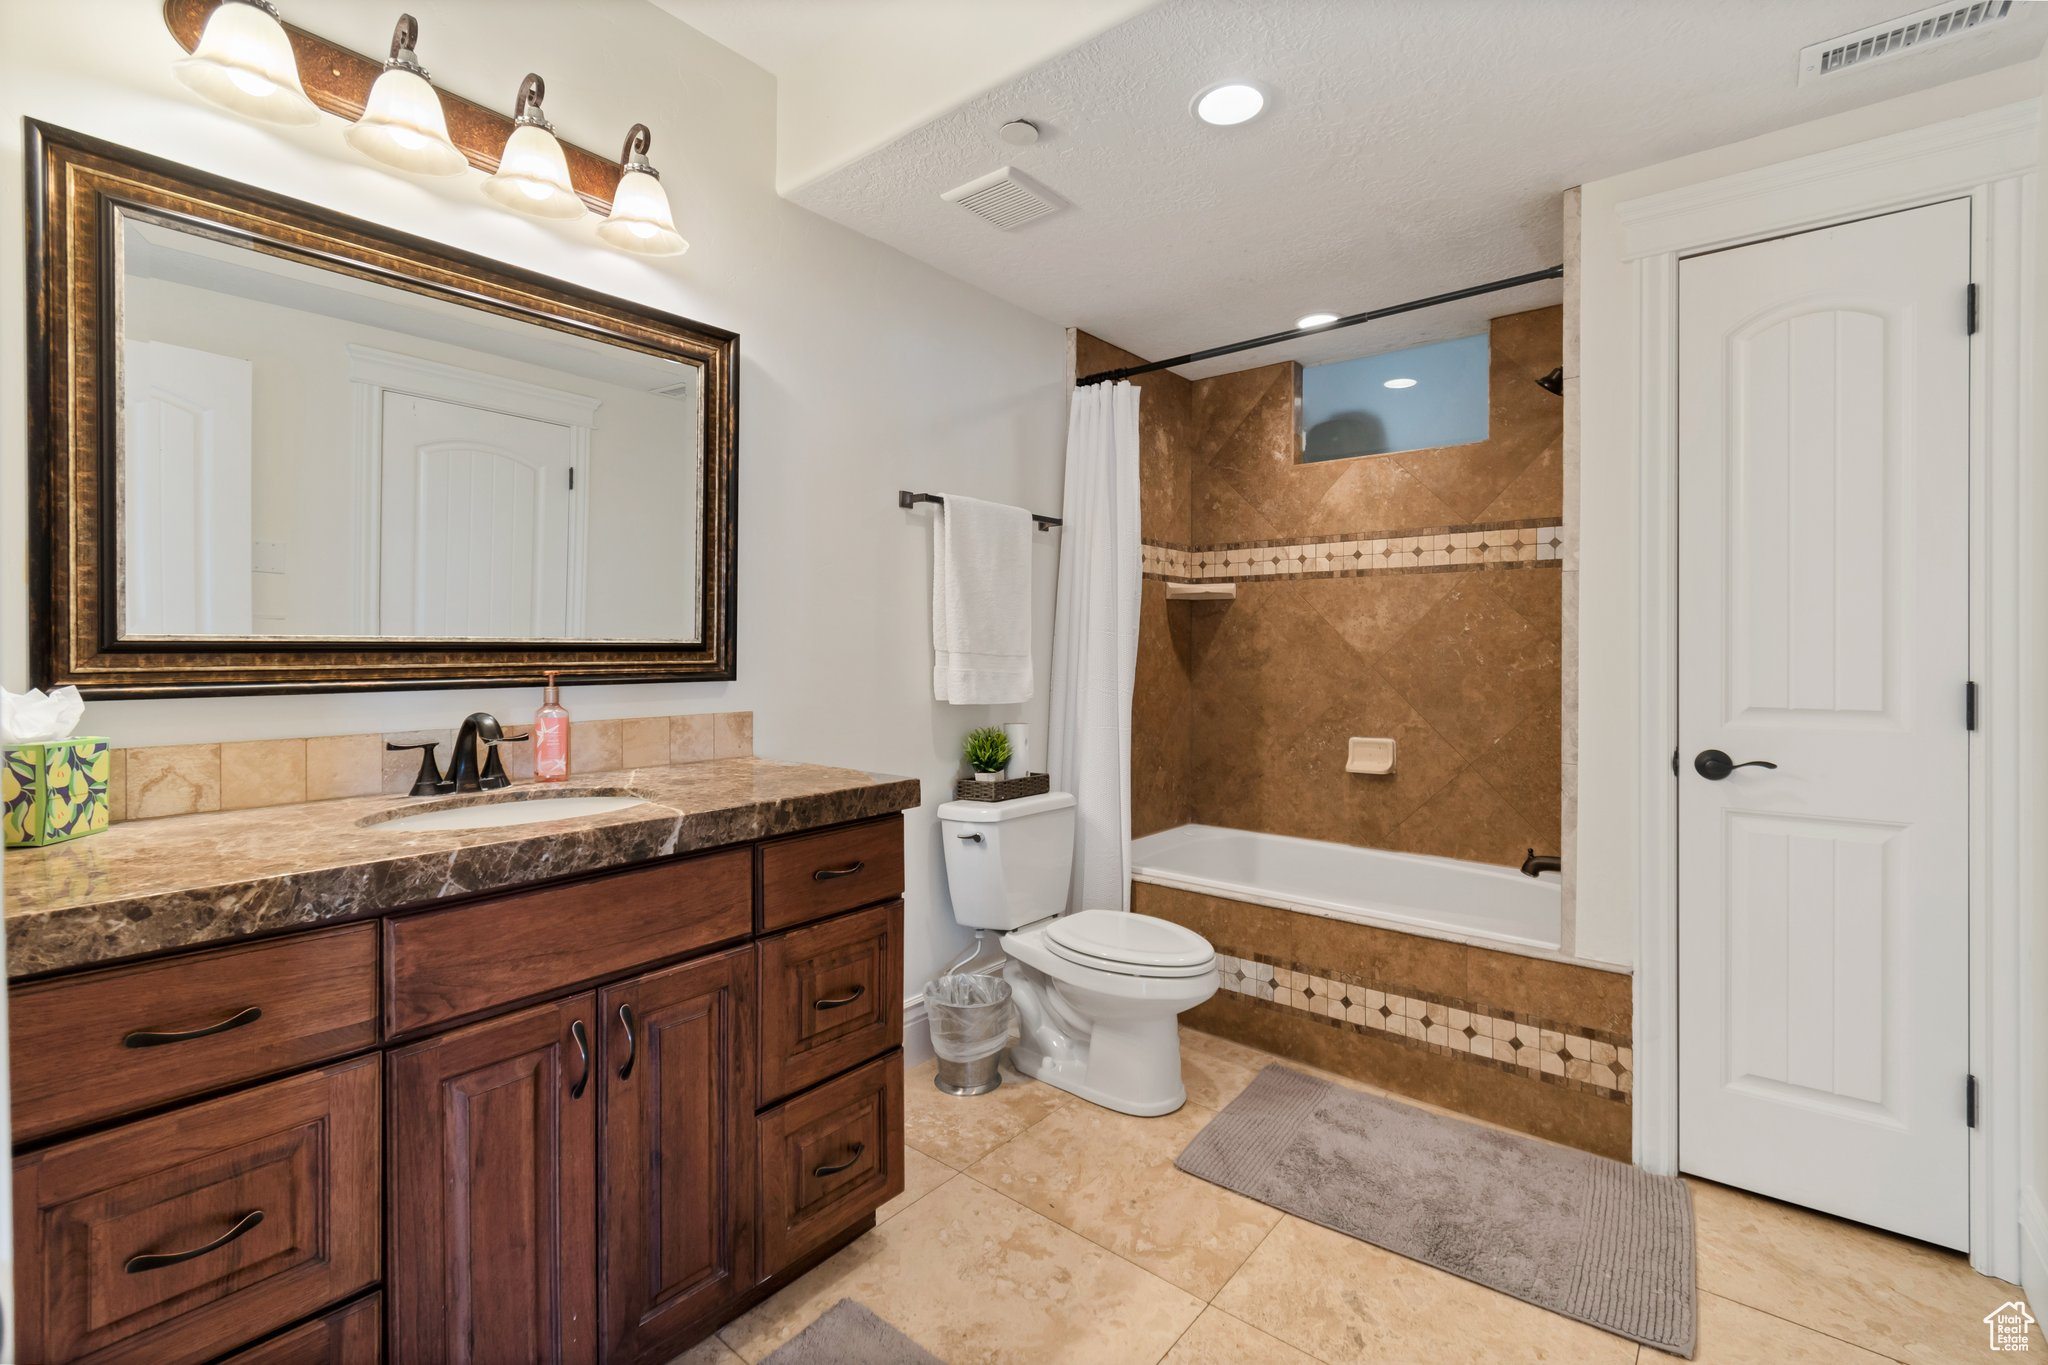 Full bathroom featuring shower / bathtub combination with curtain, toilet, vanity with extensive cabinet space, and tile flooring